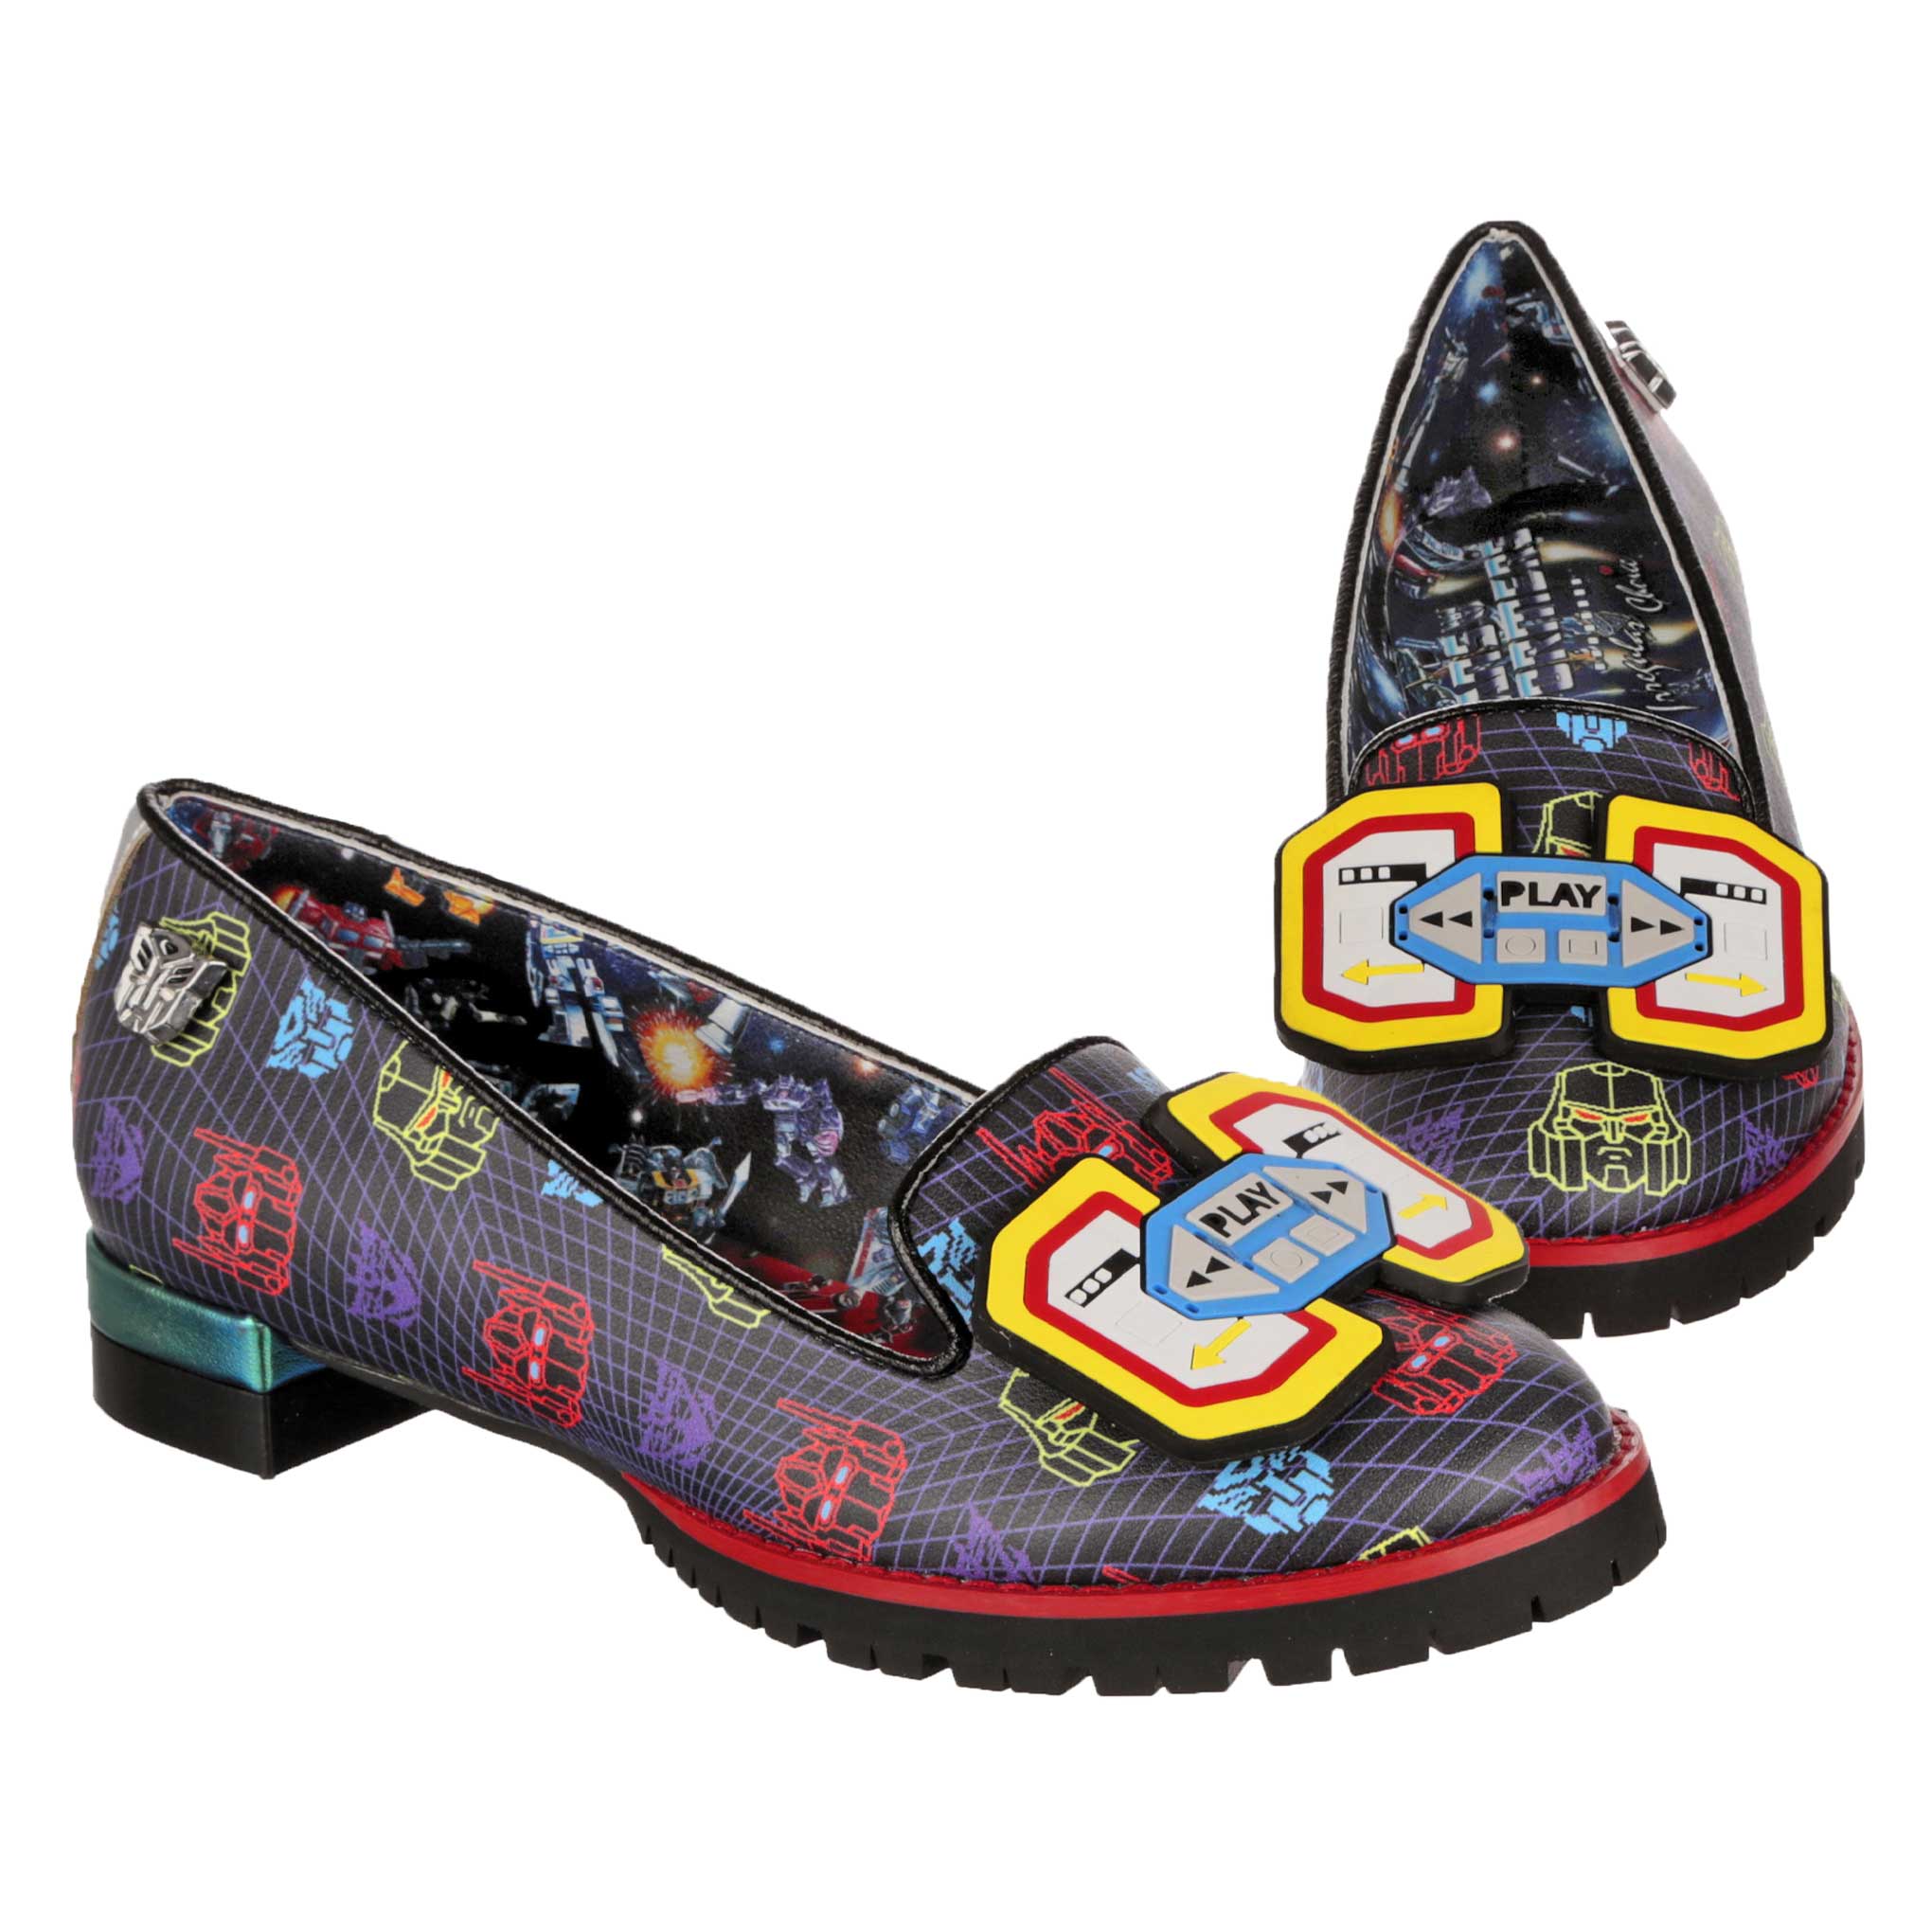 A pair of Synthwave Transformers themed black ballet pumps featuring a retro pixal art print with Autobot and Soundwave logos on. A Transformers print lines the inside of the shoe showing Transformers battling in space. A rubber Play and stop cassette player decal sits on the toe of the shoe whilst black chunky soles finish off these slip-on flats. 